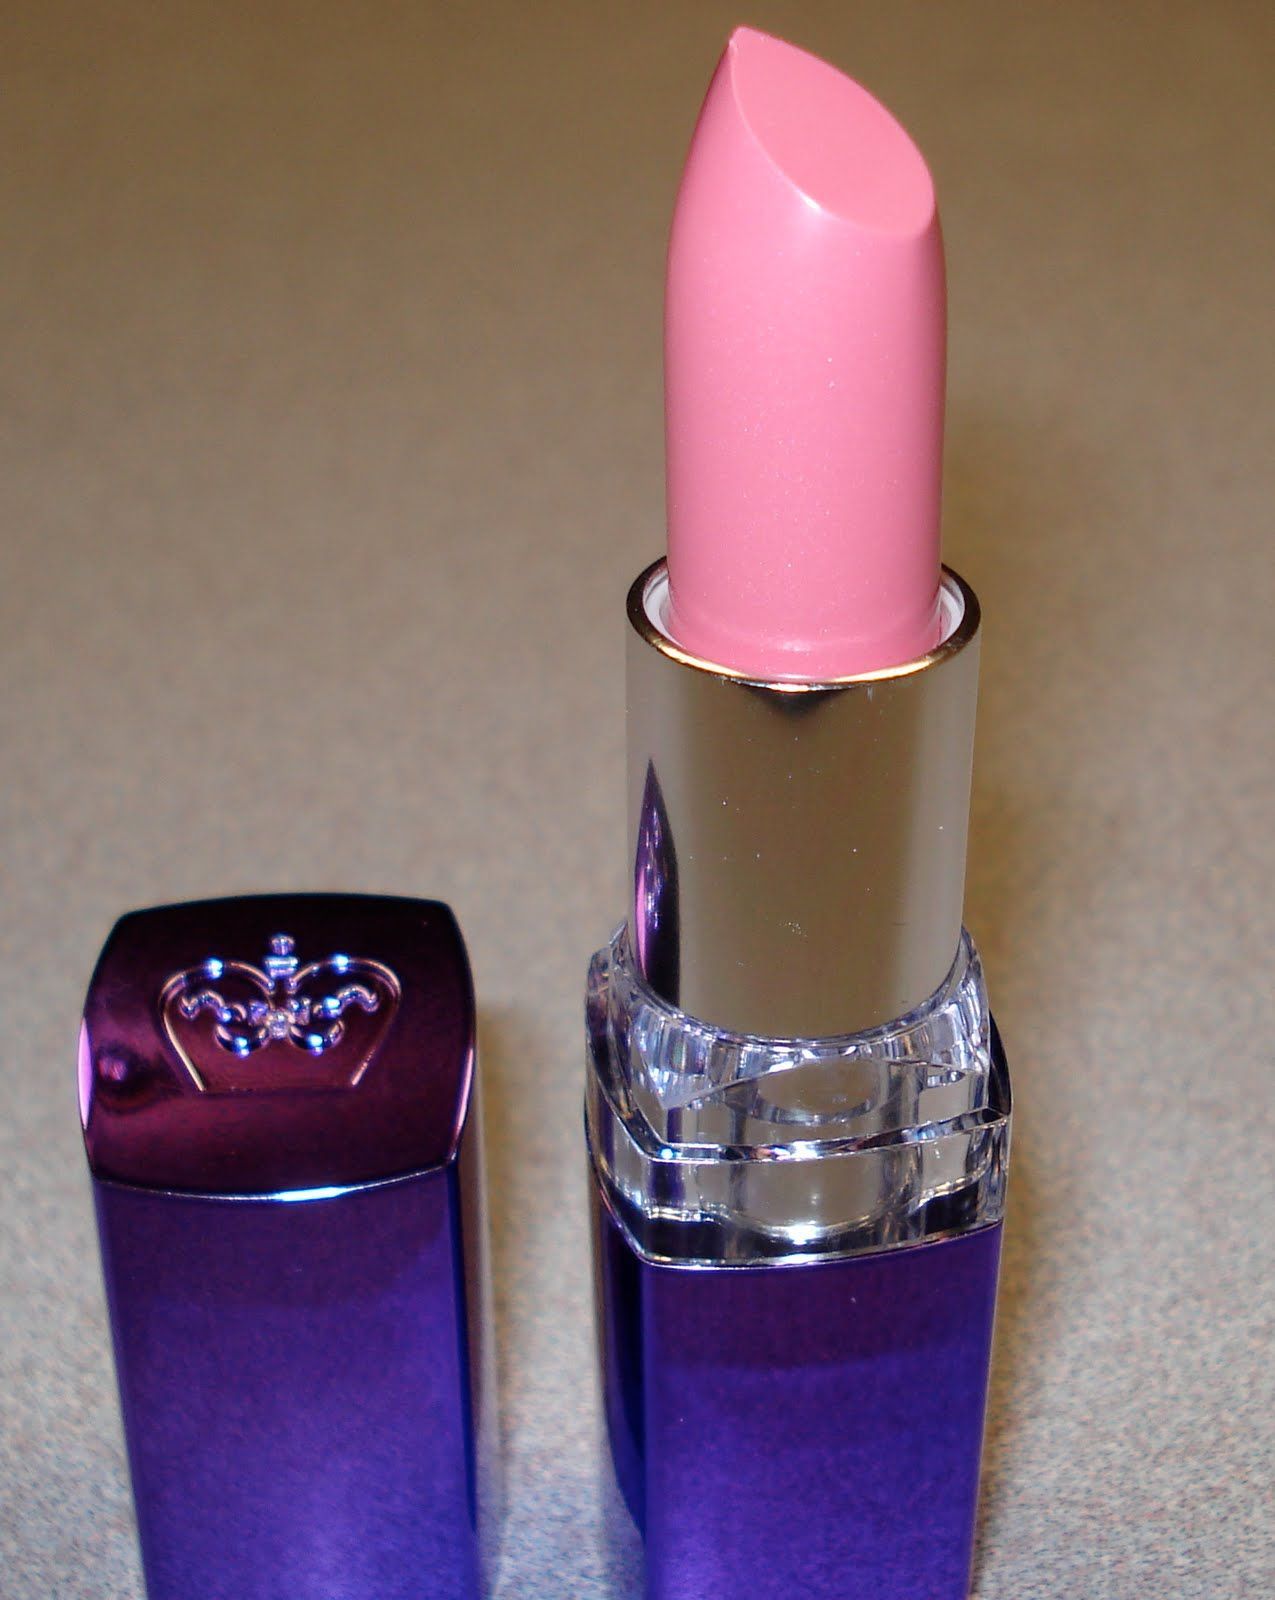 Rimmel Pink Chic. According to another pinner, this is the best pink drugstore lipstick ever. Might have to give it a try.